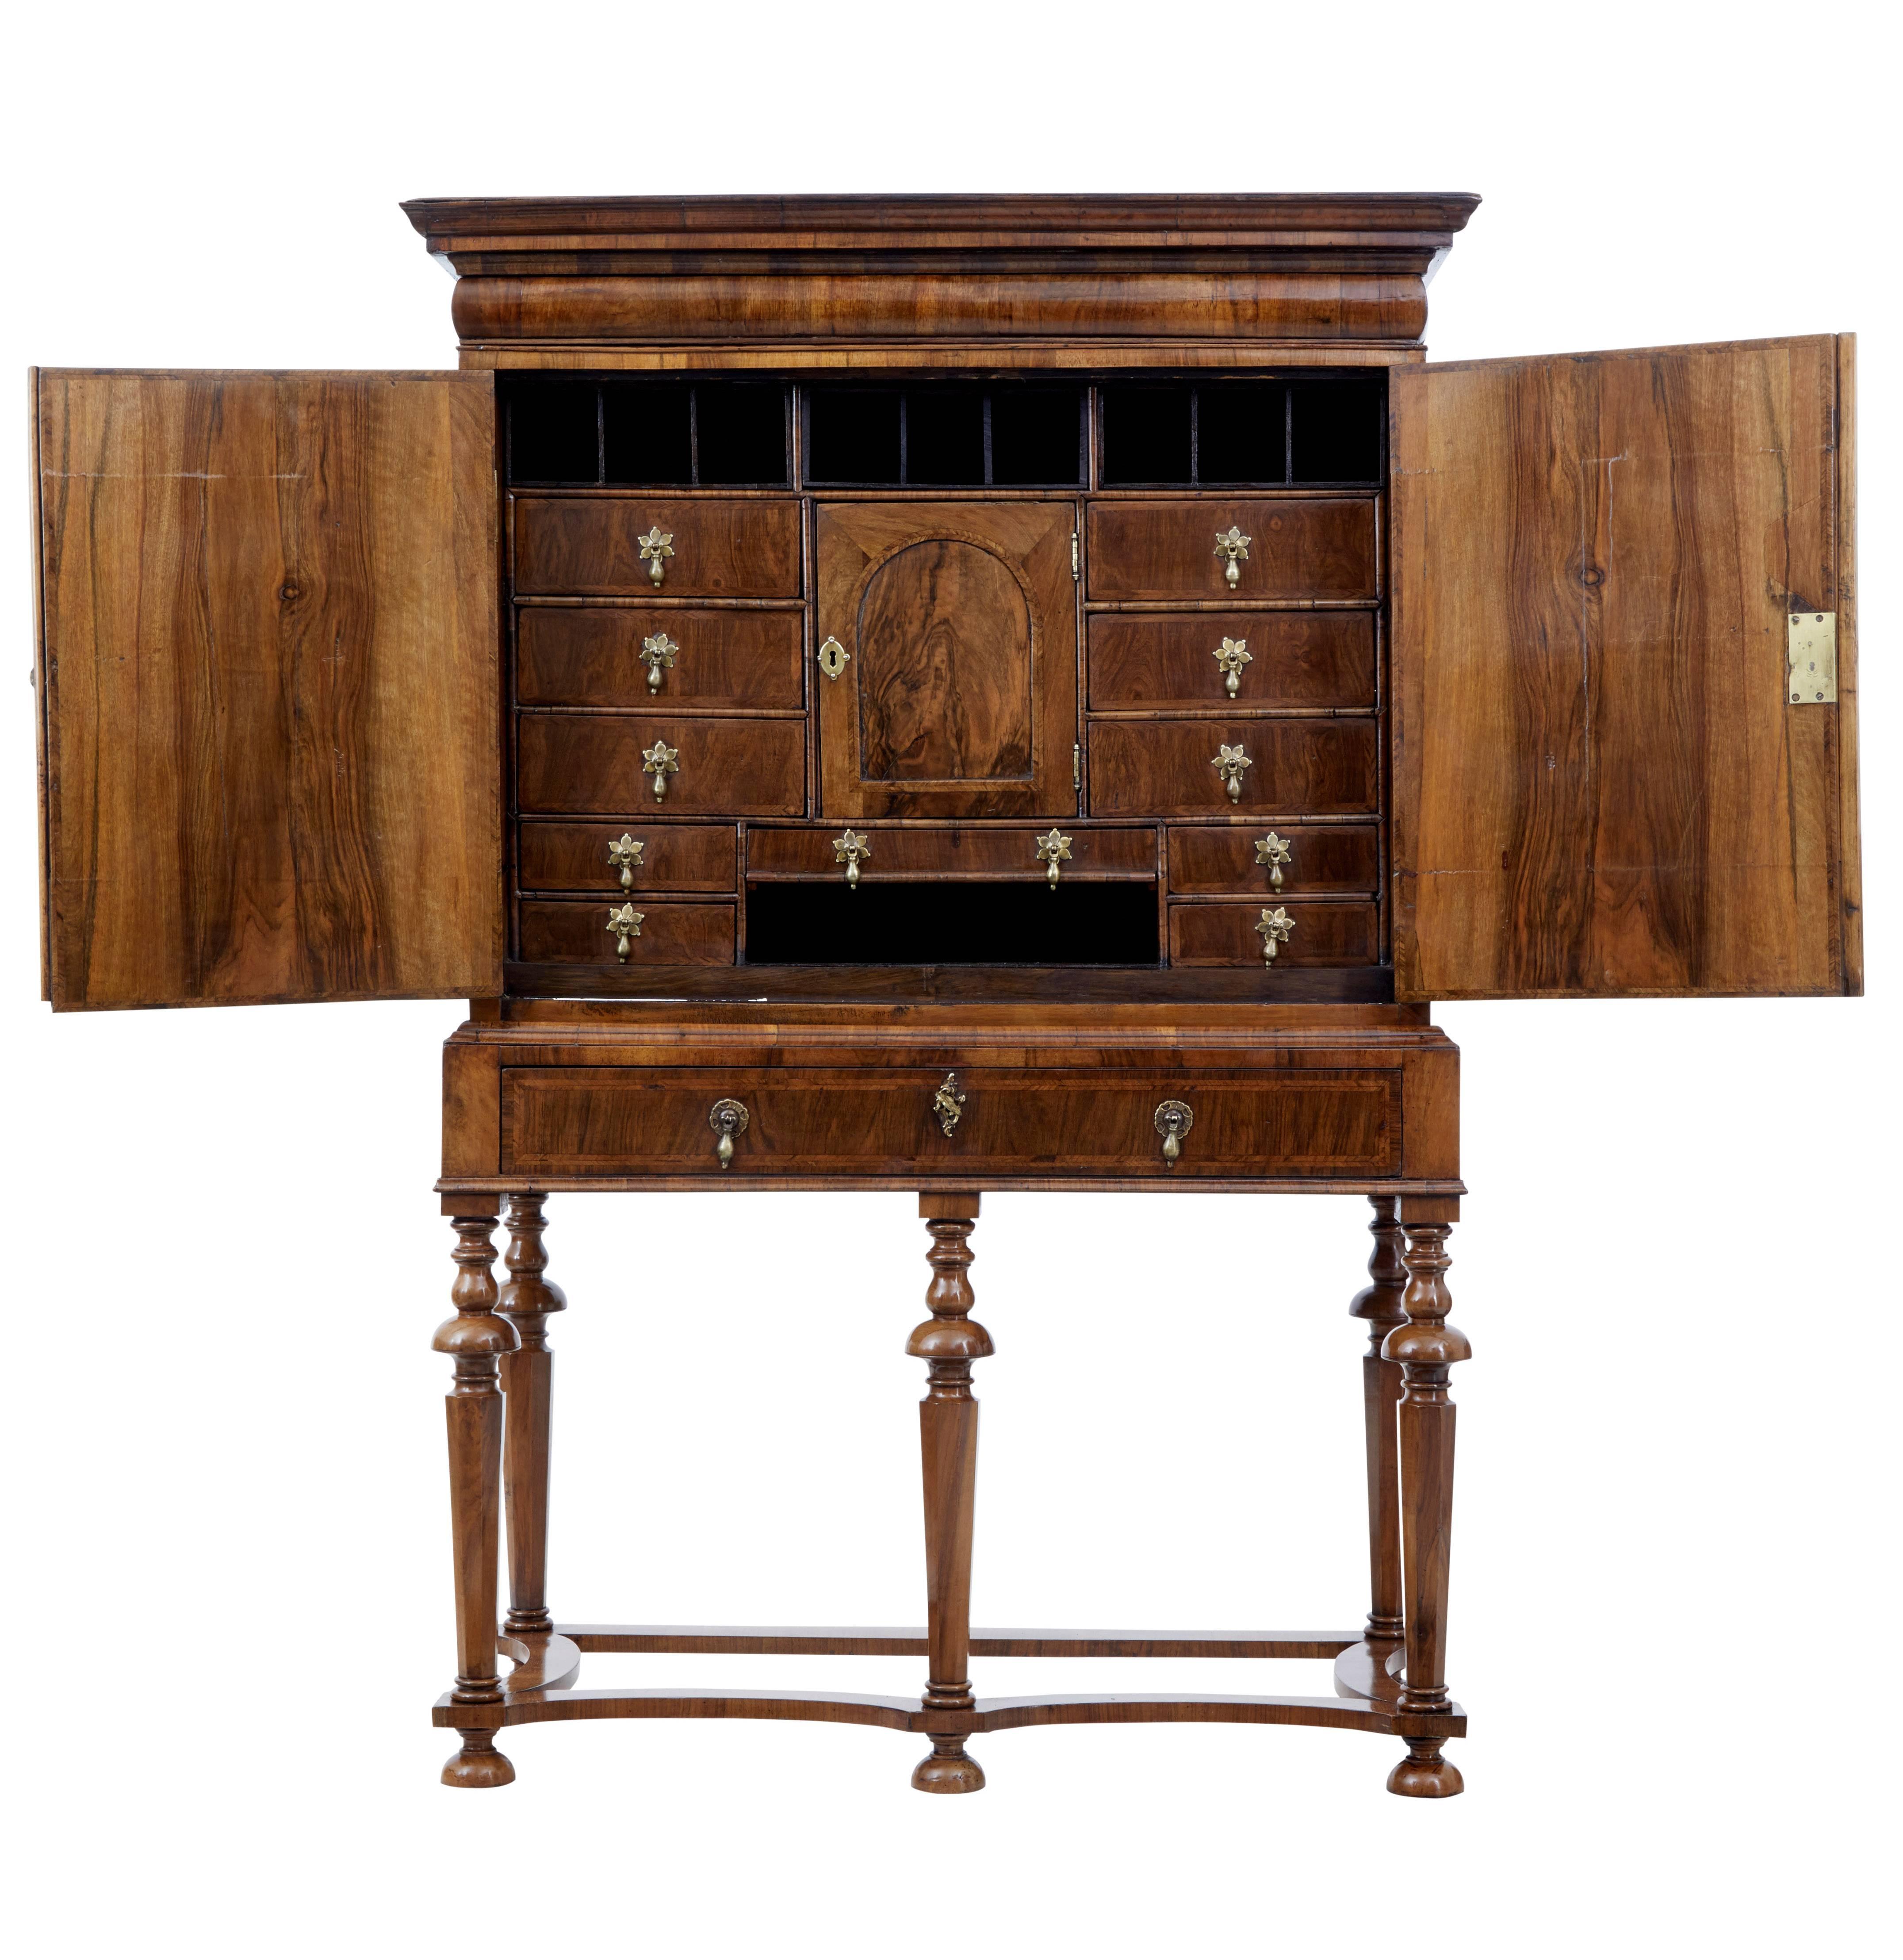 British Early 18th Century William and Mary and Later Walnut Chest on Stand